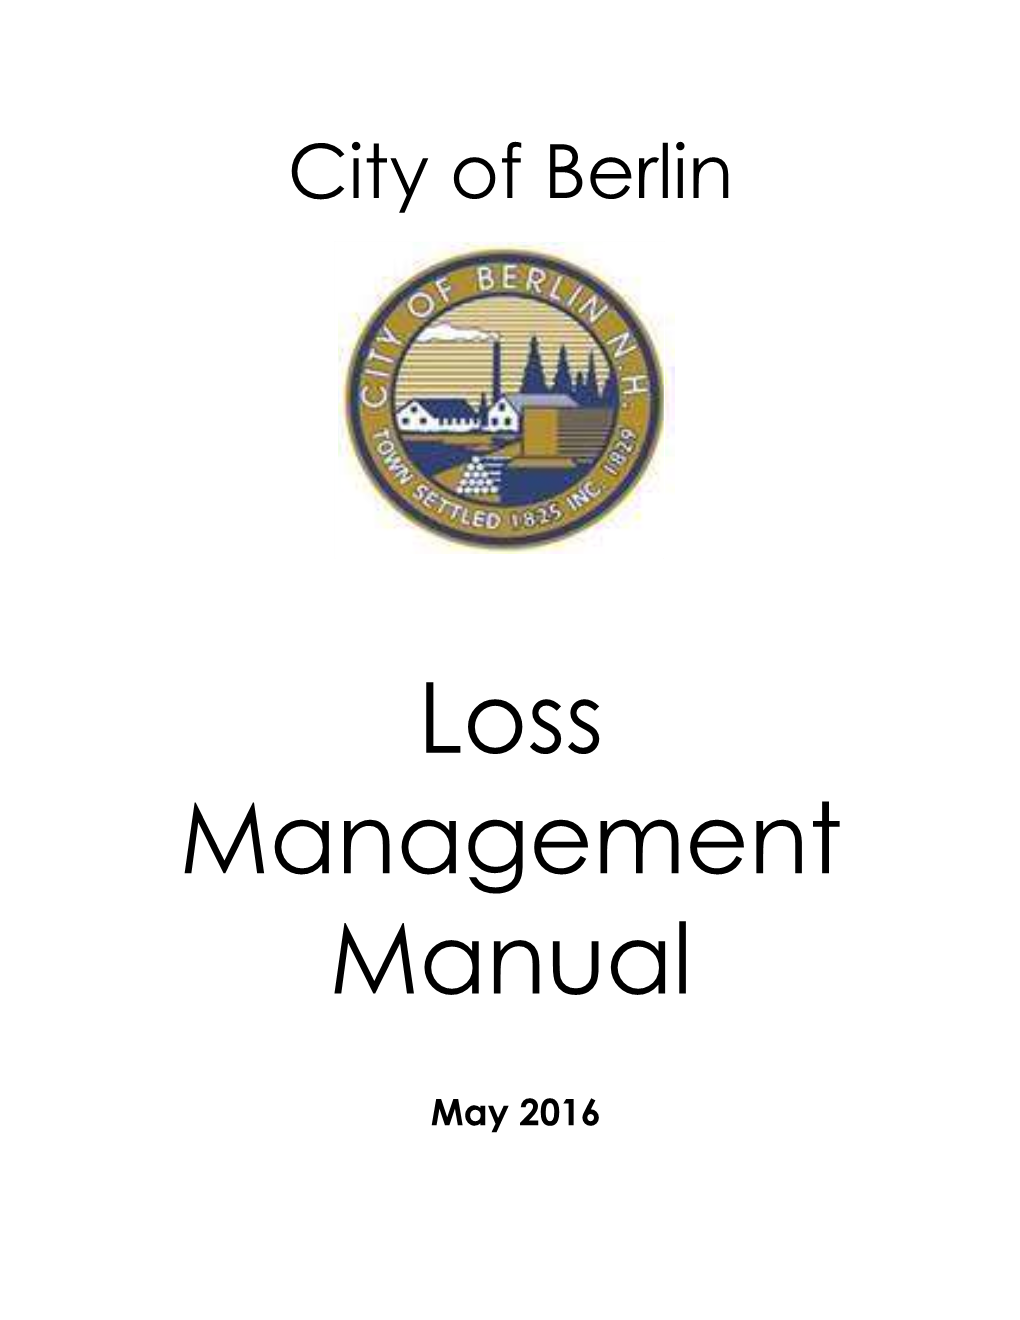 Loss Management Manual When They Are Hired As Well As Whenever the Manual Is Revised